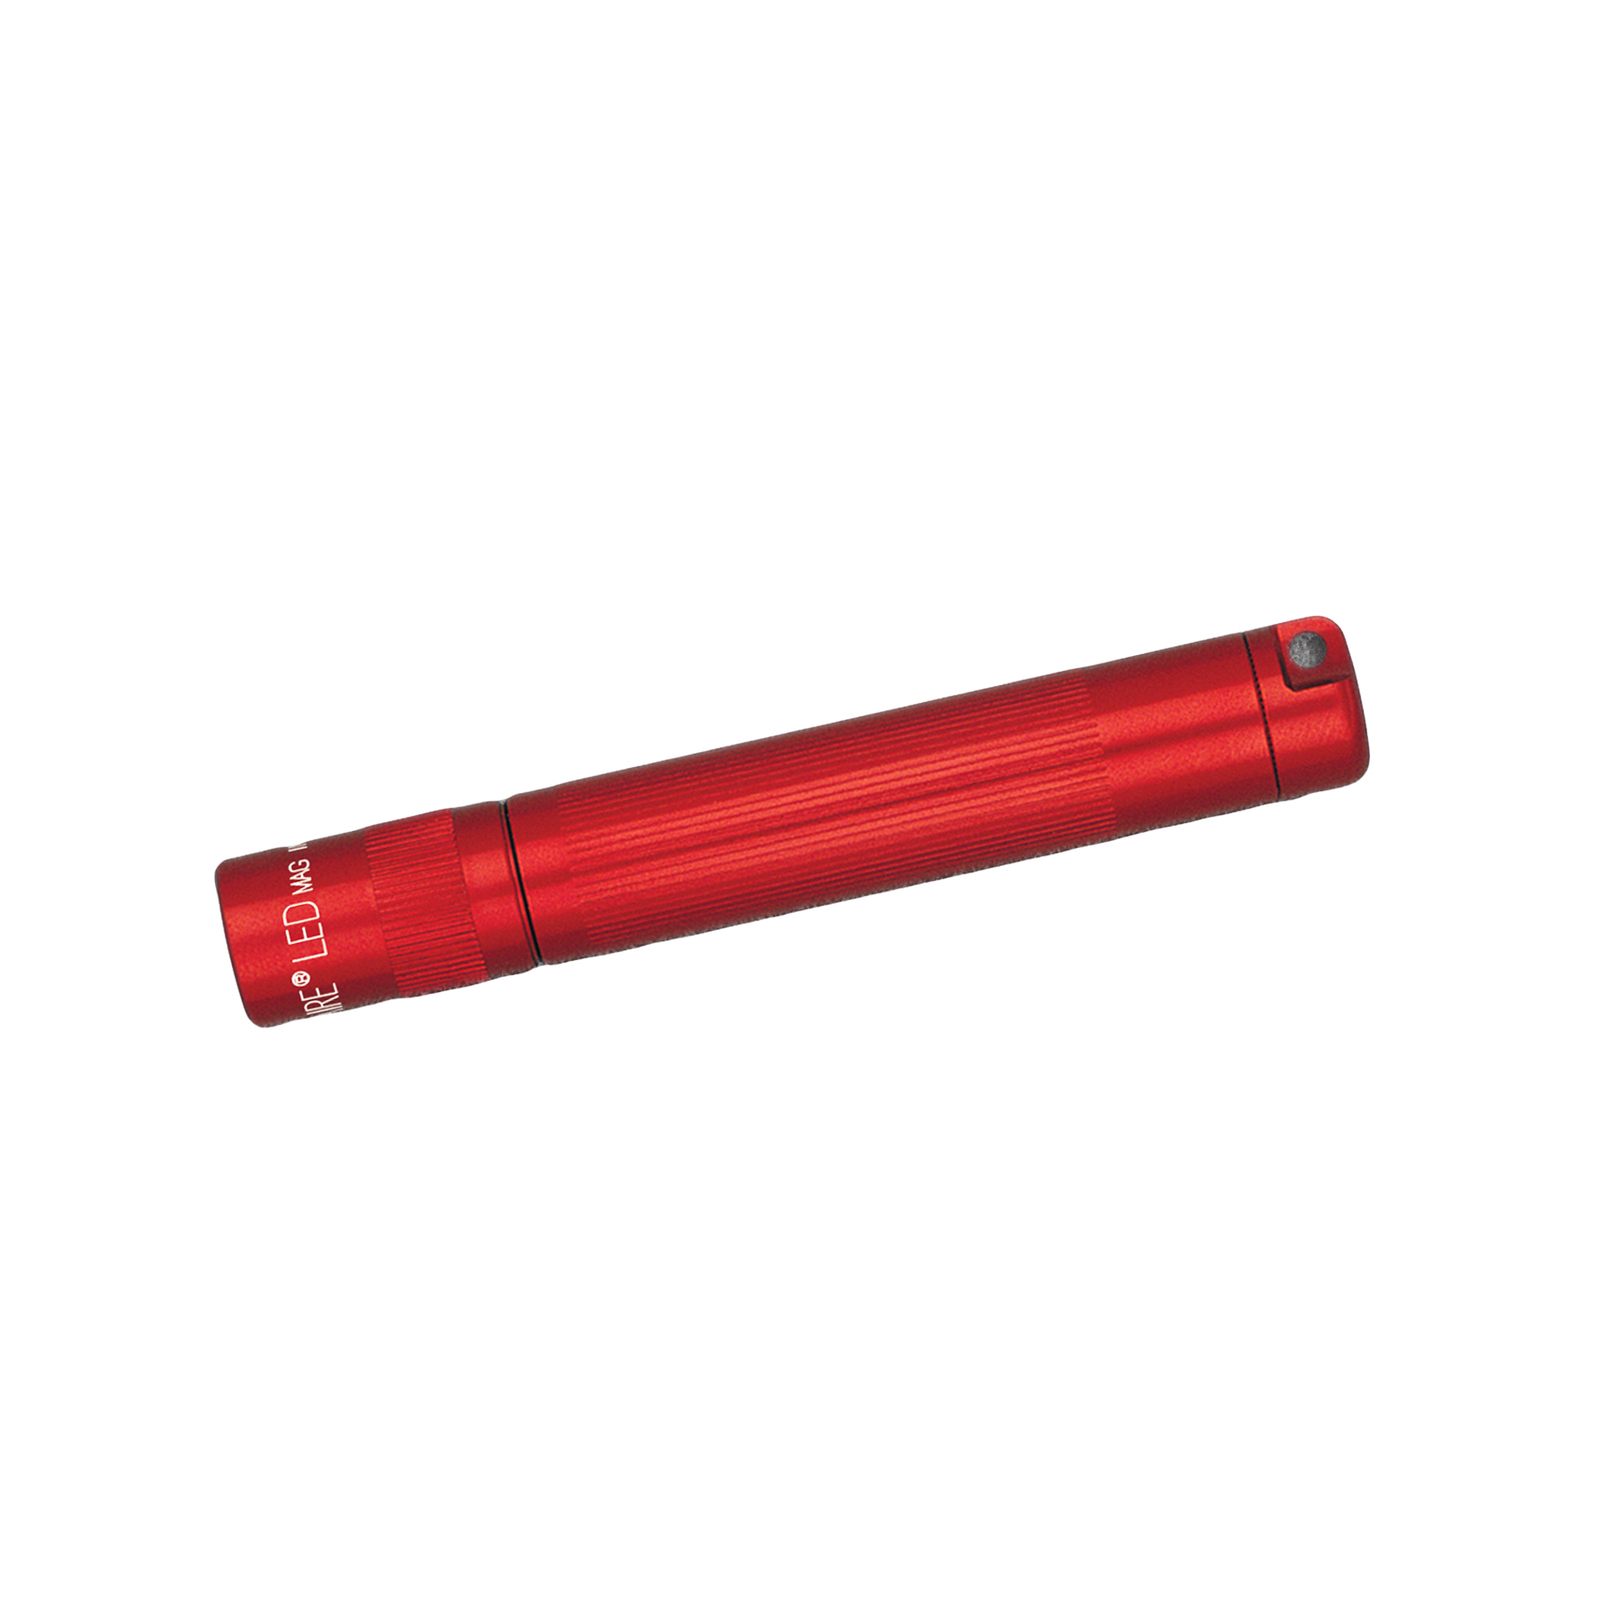 Maglite LED torch Solitaire, 1-Cell AAA, Box, red